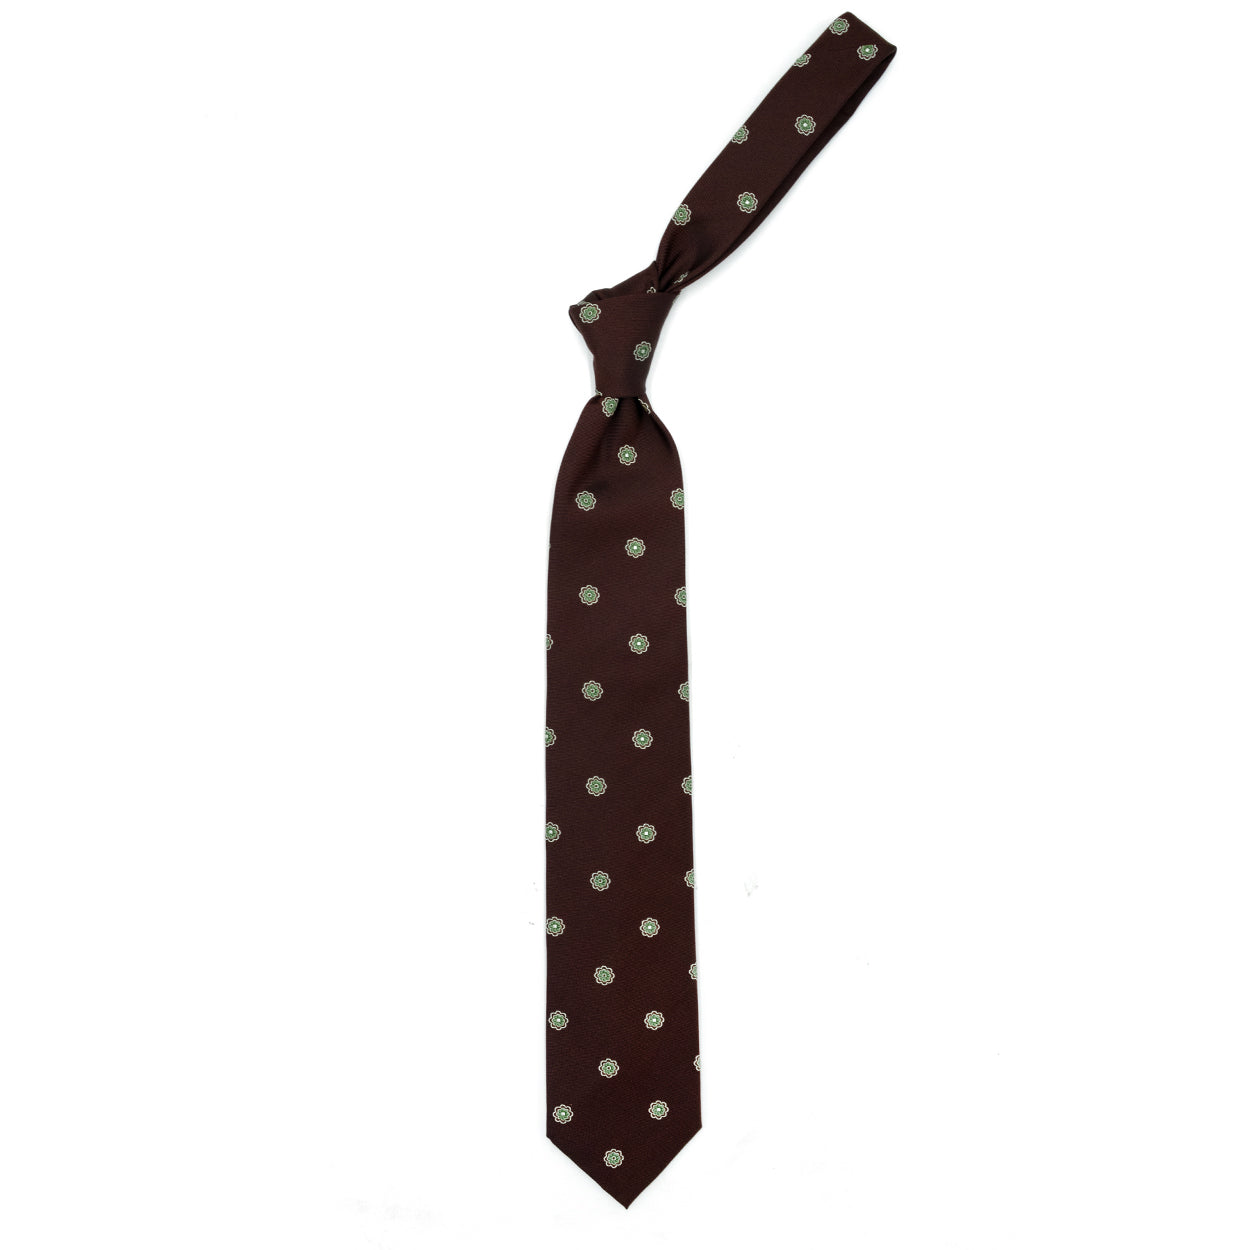 Brown tie with gray flowers